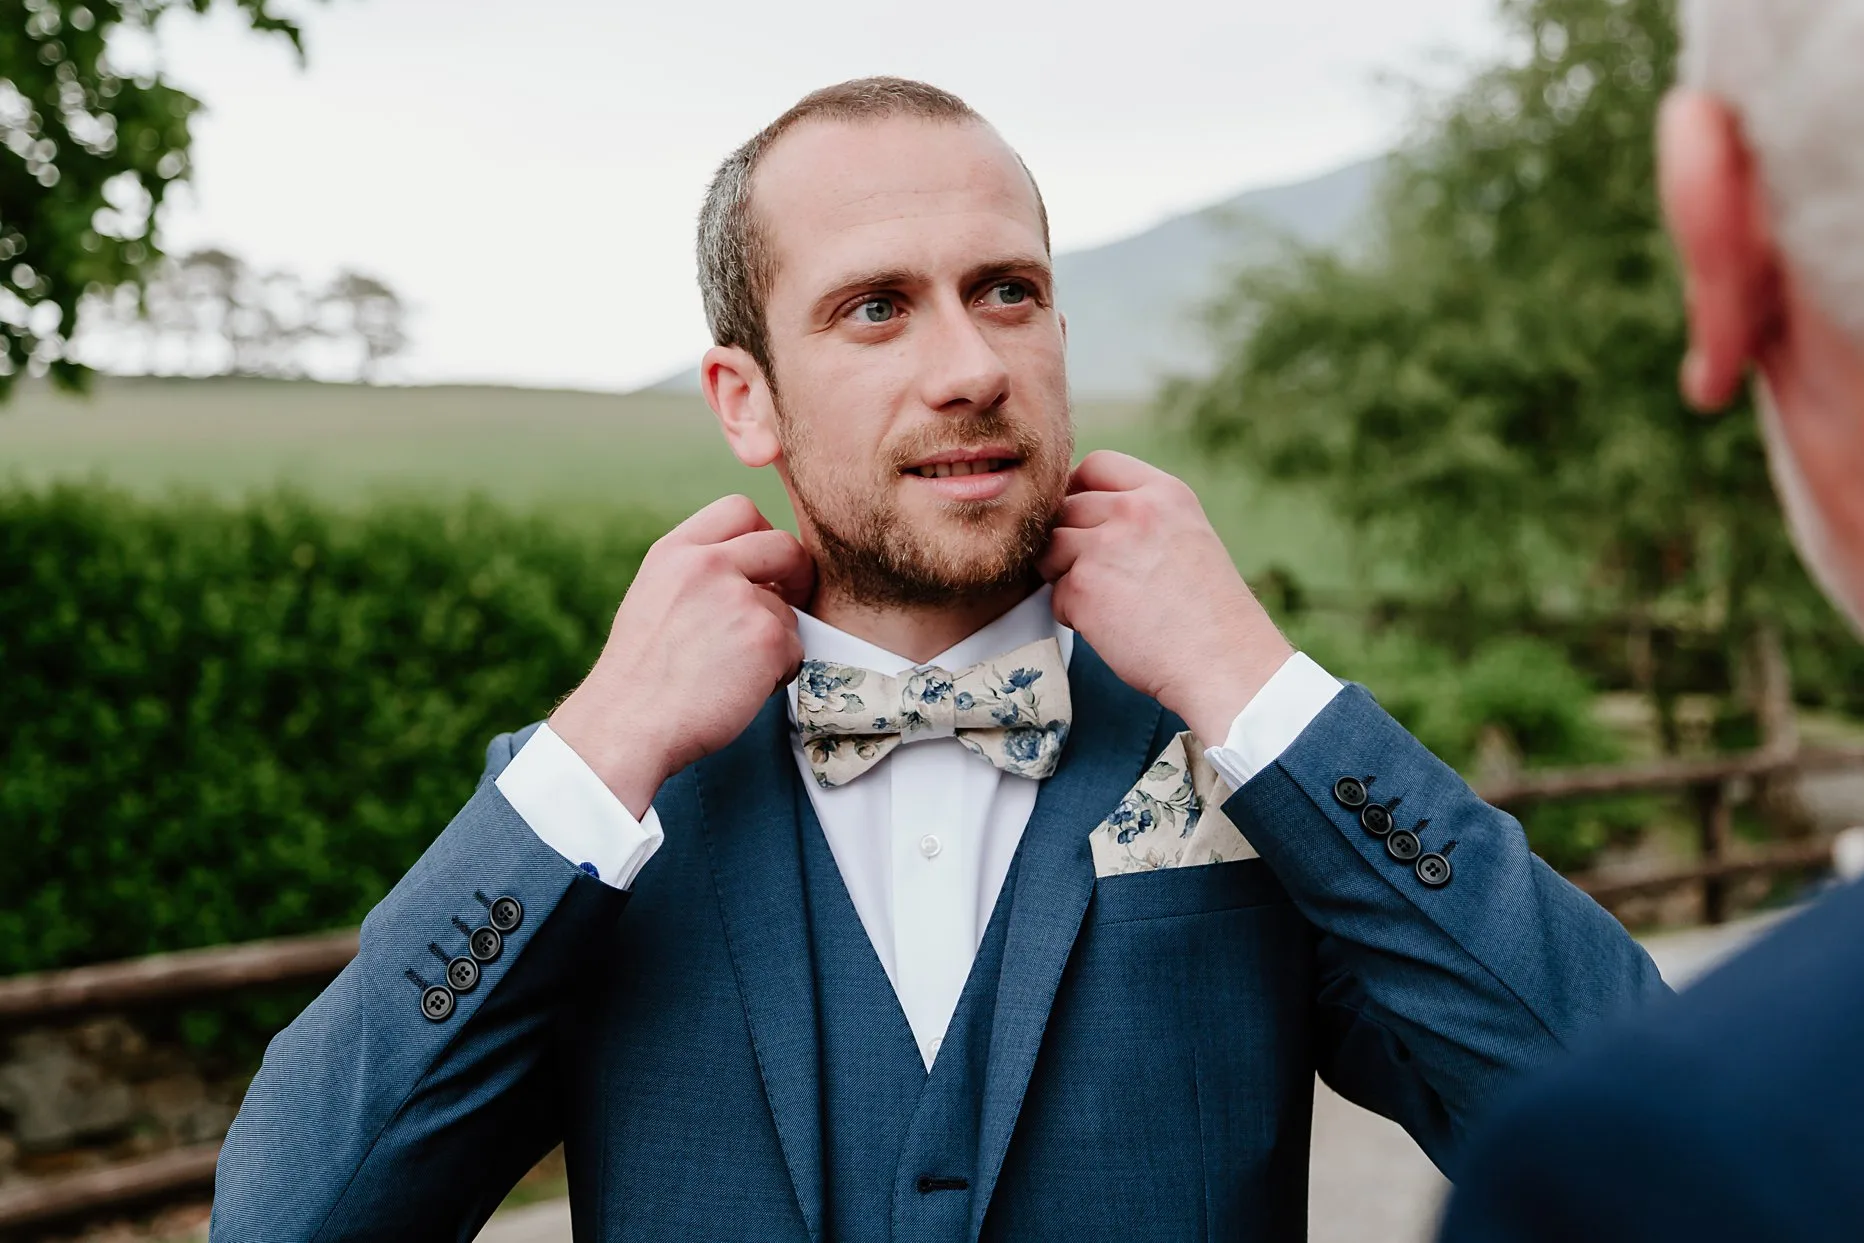 Groom dressed in blue suit ad floral bowtie. Groom is adjusting his collar ad looking into the distace.